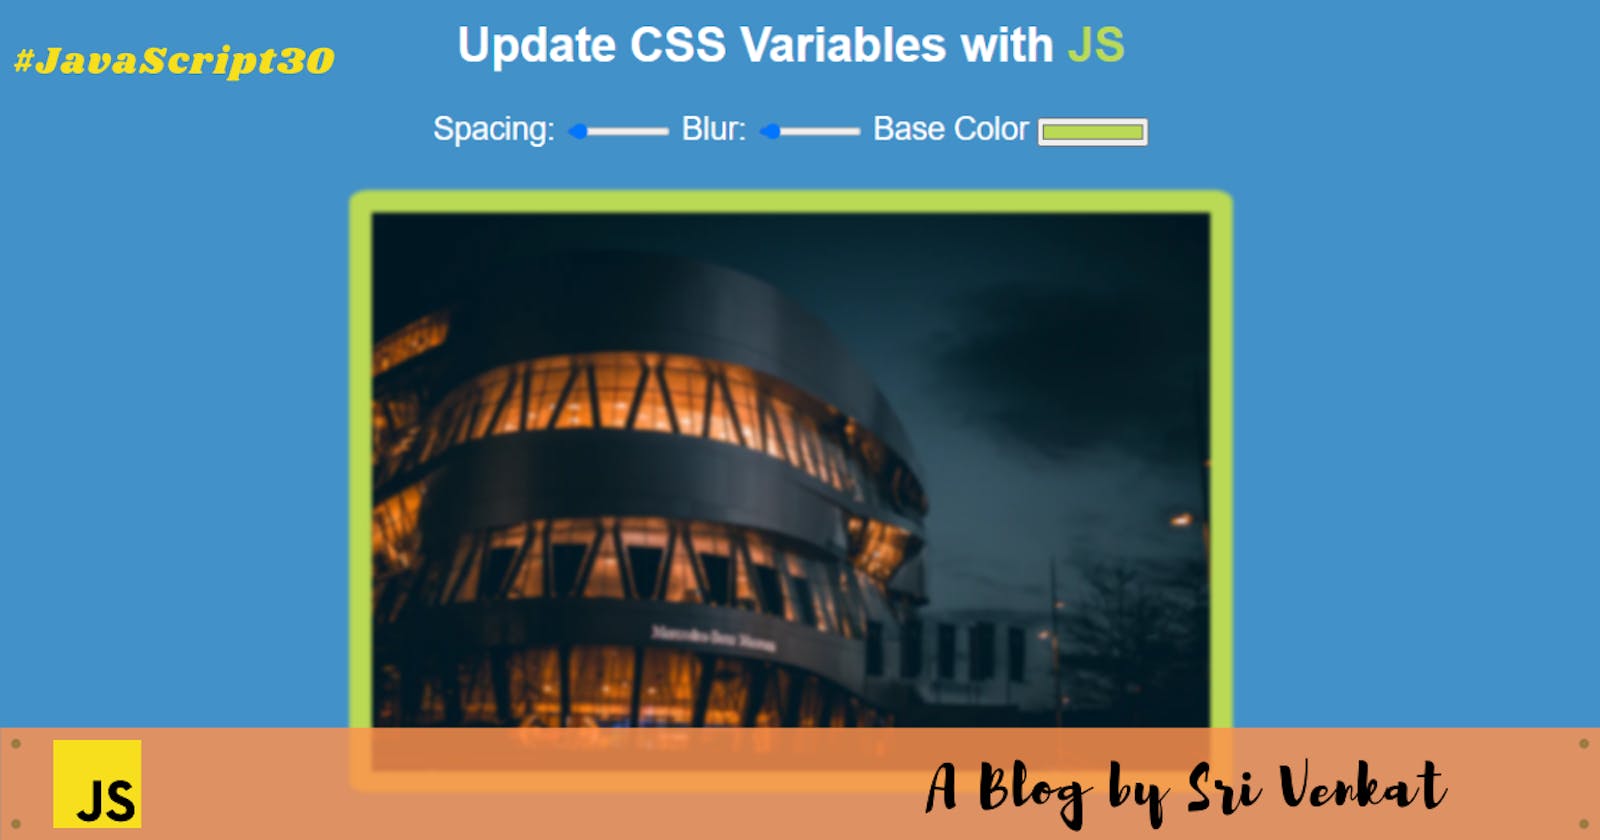 How to update CSS Variables with JS : Day 3 #JavaScript30